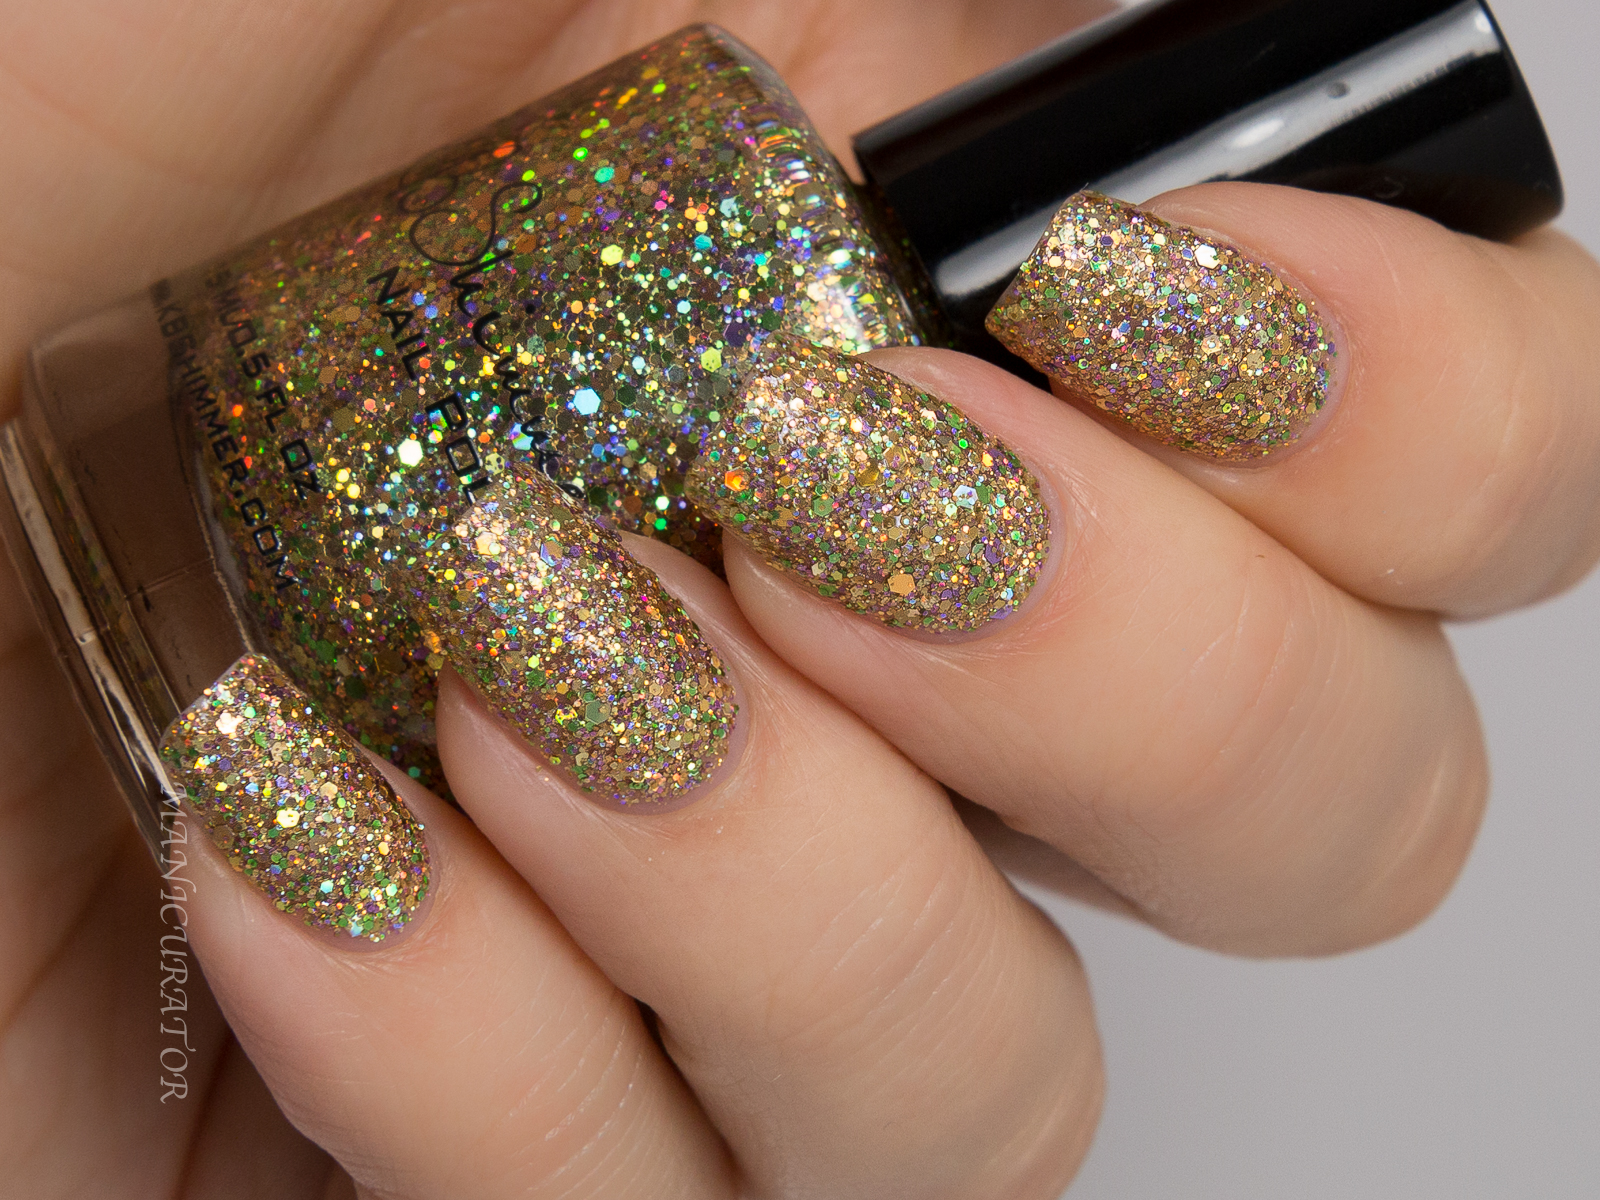 KBShimmer-Winter-2014-Dressed-To-Gild-Texture-Swatch